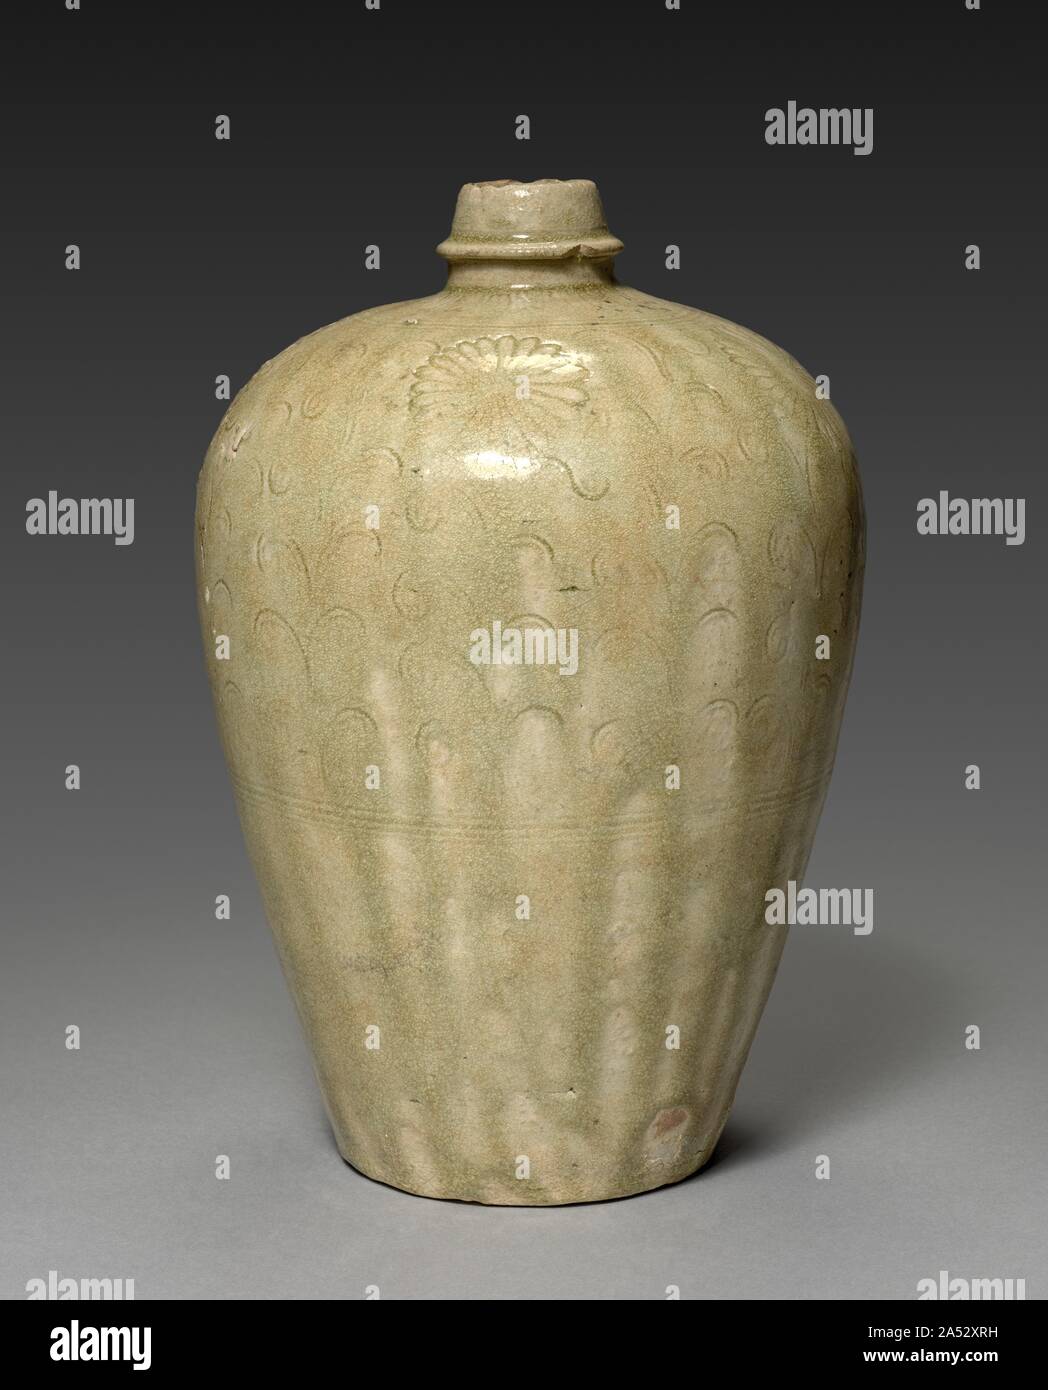 Wine Flask, c. 1300. This wine flask ( heishi ) was produced in Seto, in present-day Aichi prefecture near the city of Nagoya. Seto ware was made in imitation of Chinese Song dynasty prototypes, and was unique among Japanese ceramics for being glazed at the initial time of its production in the late 1200s. Such wares were later prized for display in tea practice. Stock Photo